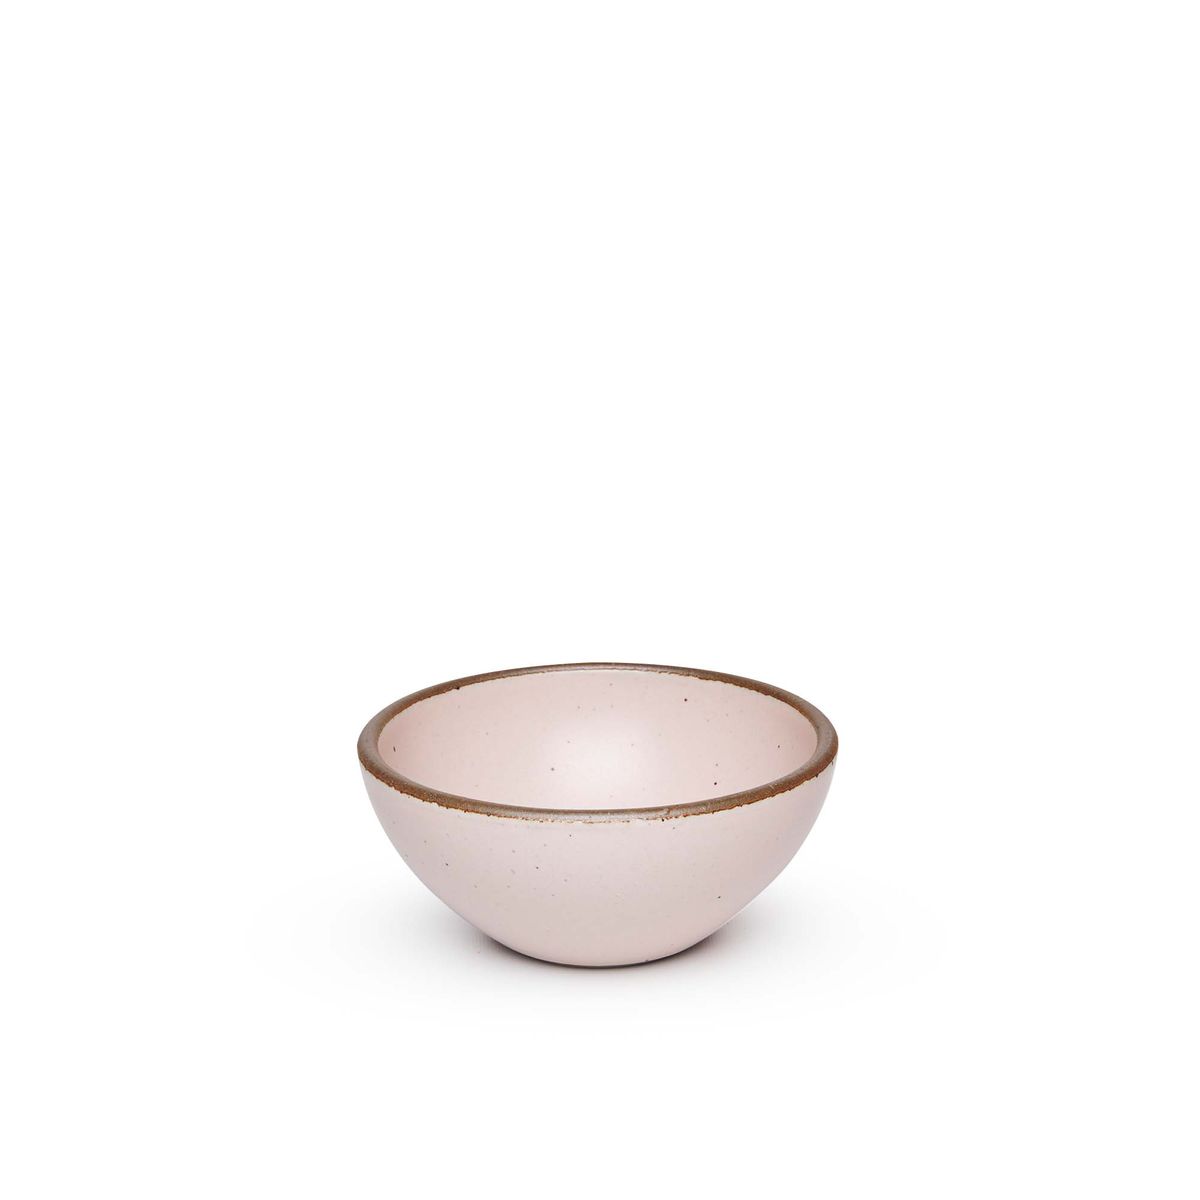 A small dessert sized rounded ceramic bowl in a soft light pink color featuring iron speckles and an unglazed rim